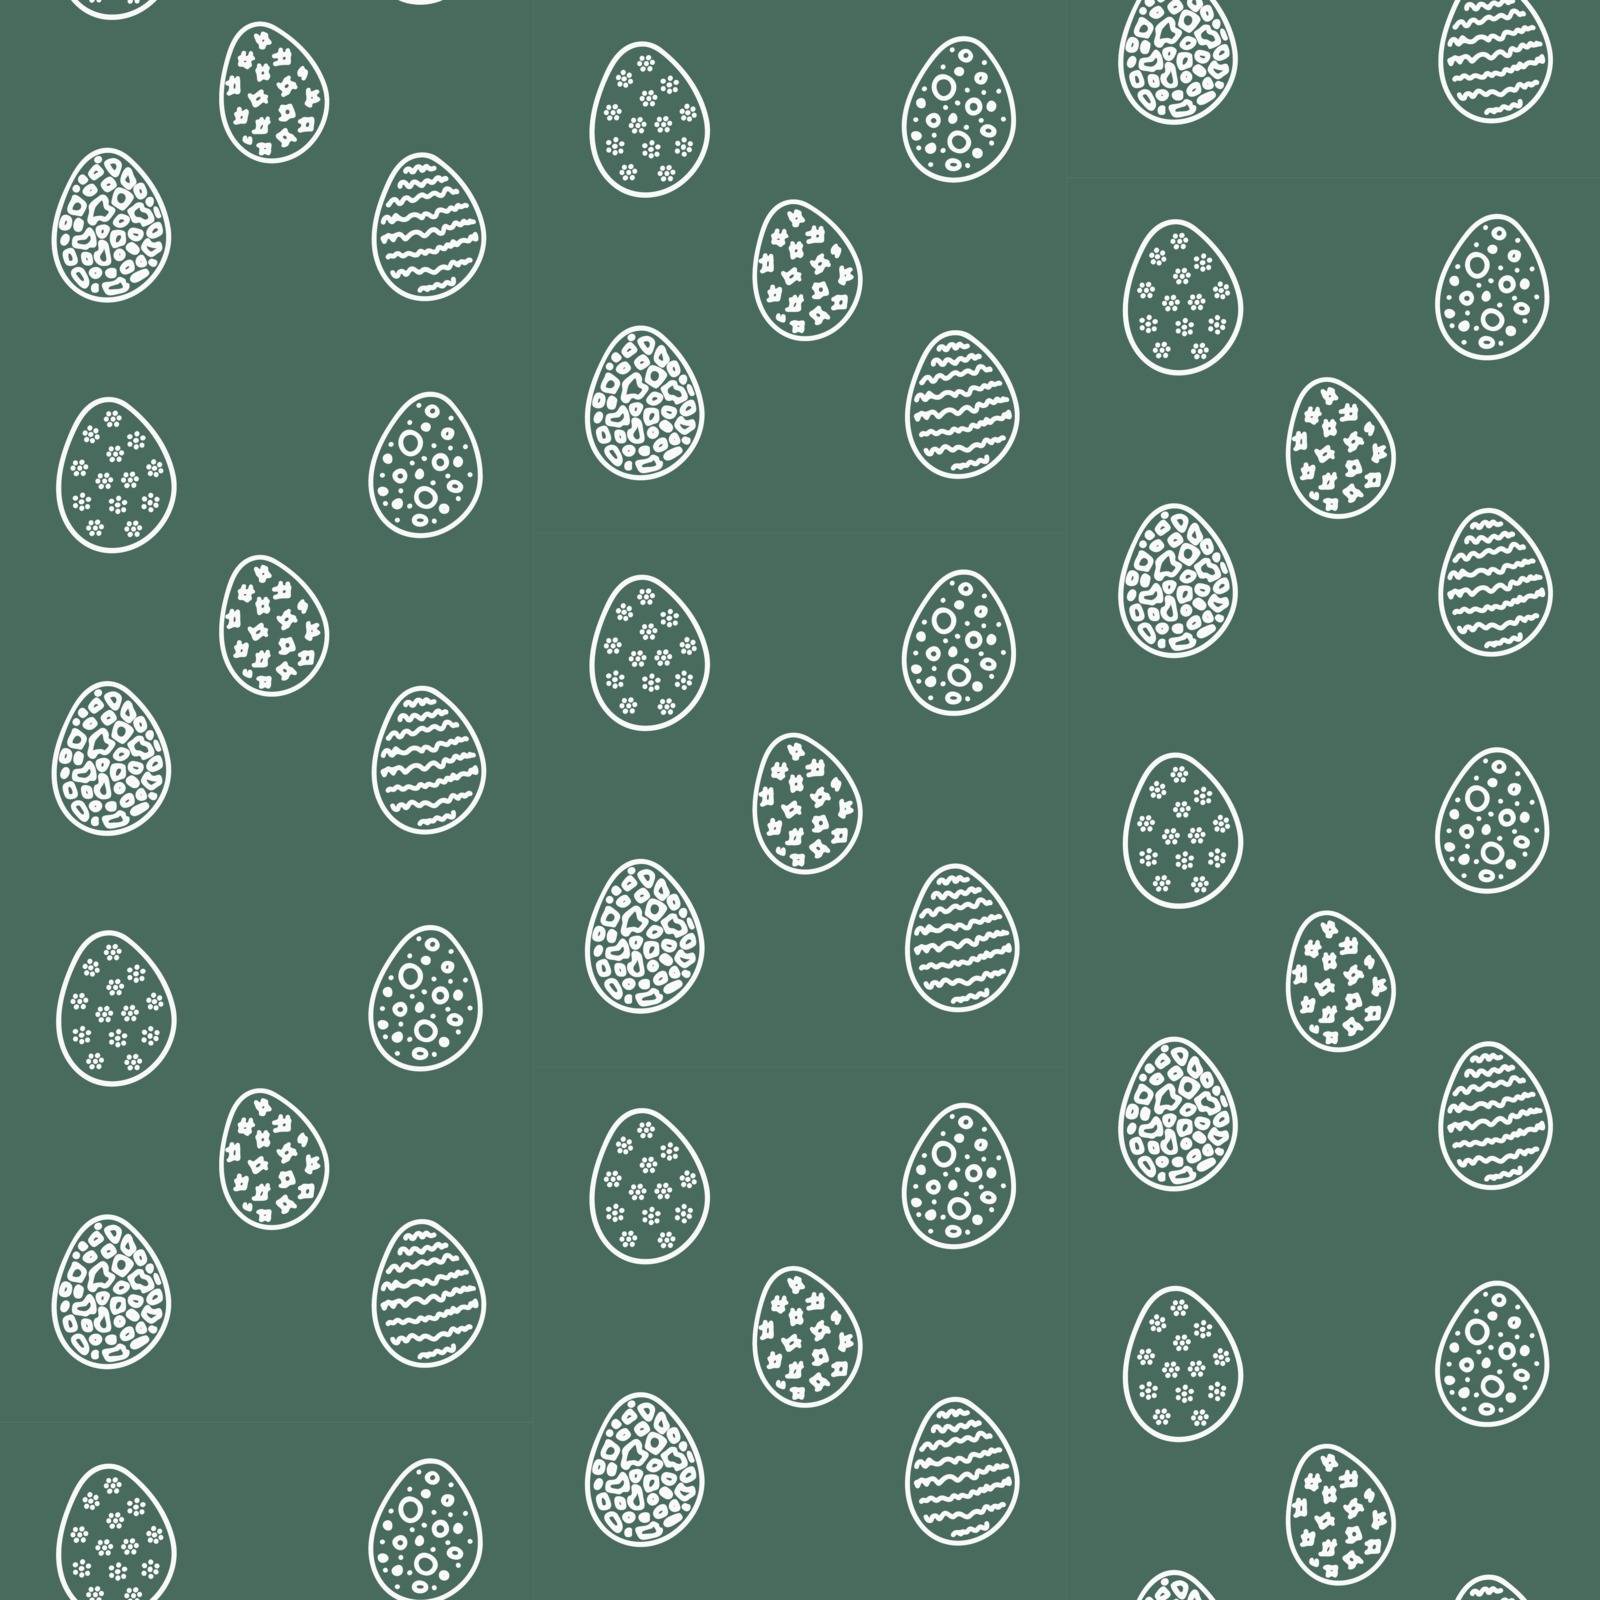 Seamless Happy Easter Contour Eggs Pattern on the Dark Green Background